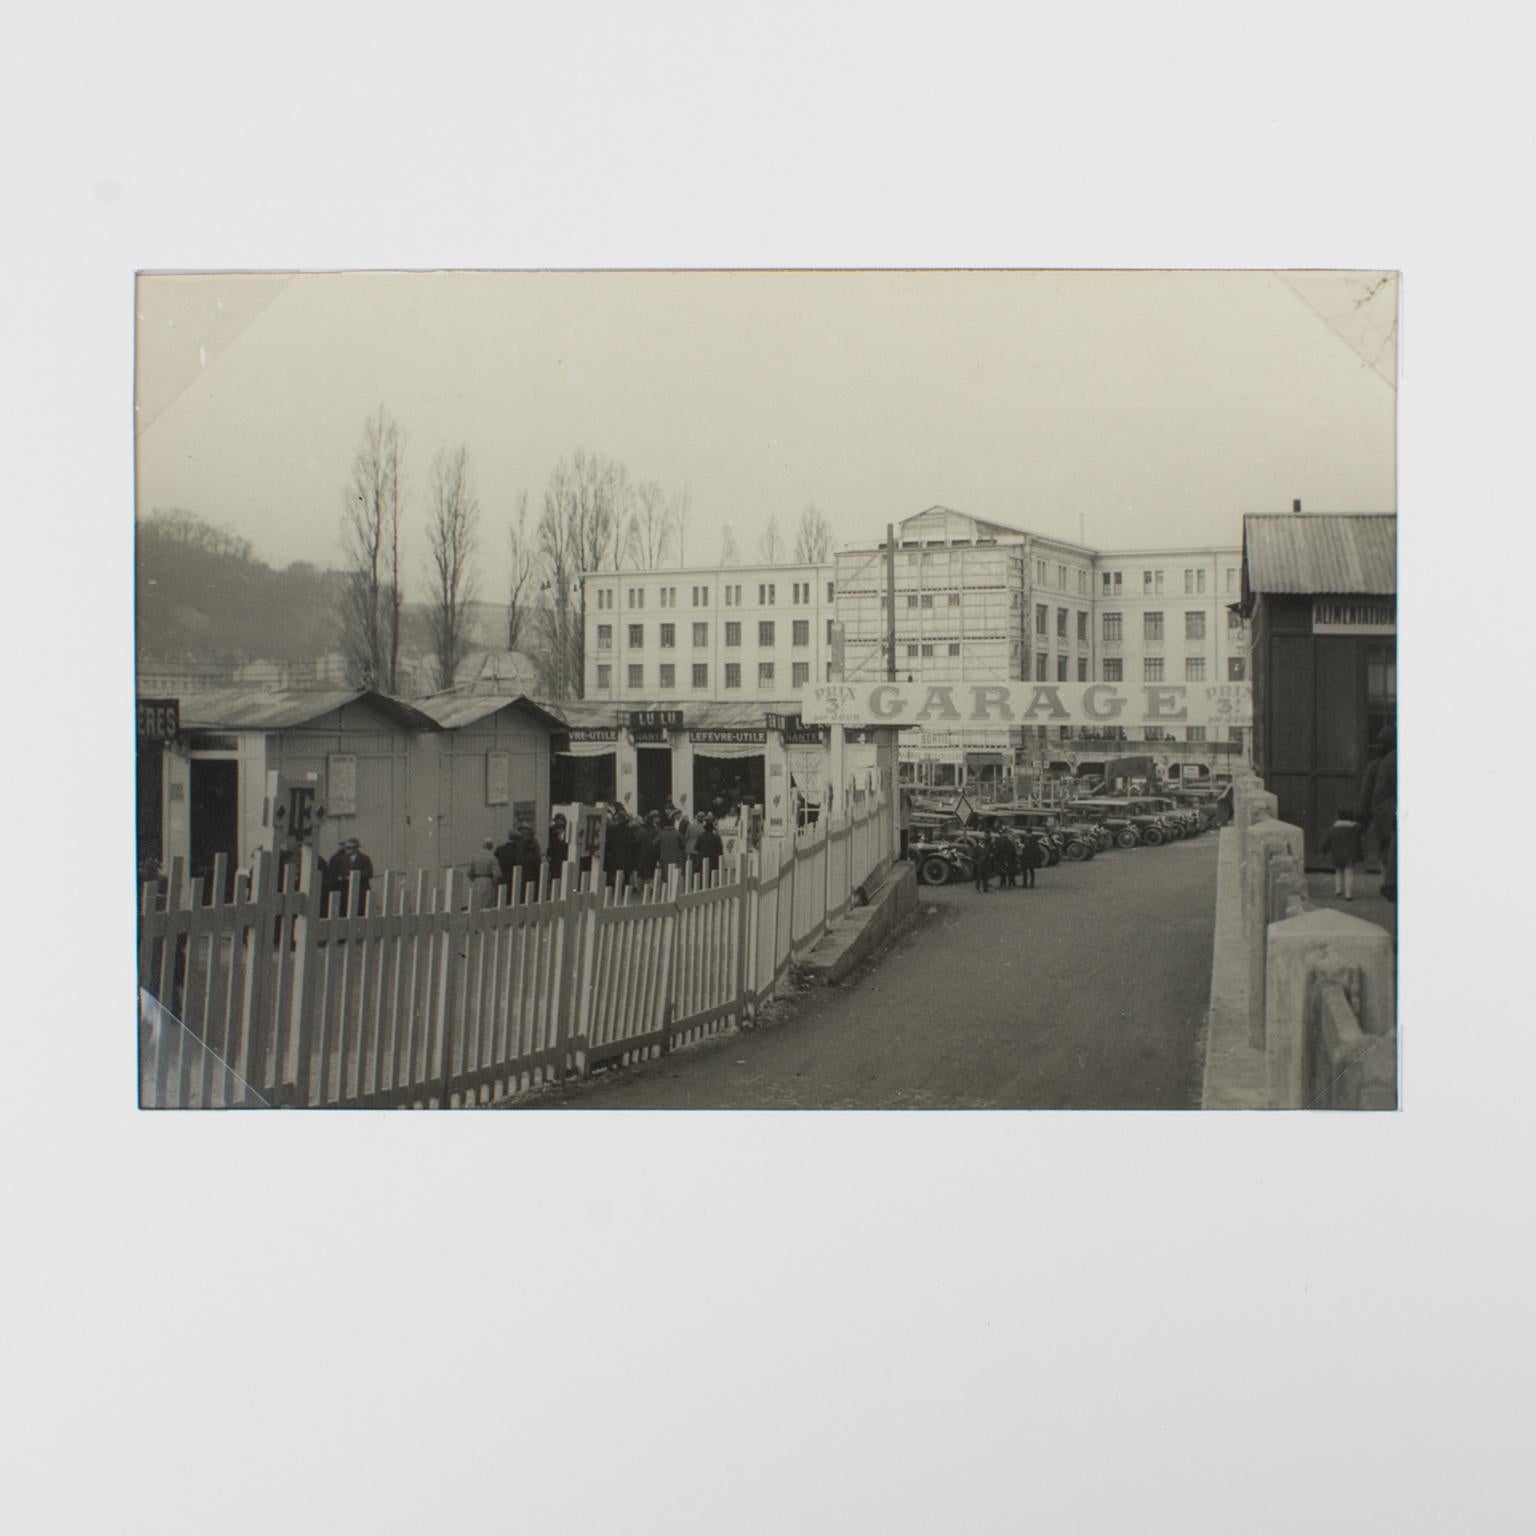 A unique original silver gelatin black and white photography, The International Autumn Fair in Lyon, France, 19th of March 1927. 
A view of the parking lot at the International Autumn Fair in Lyon, March 19, 1927.
Features:
Original Silver Gelatin